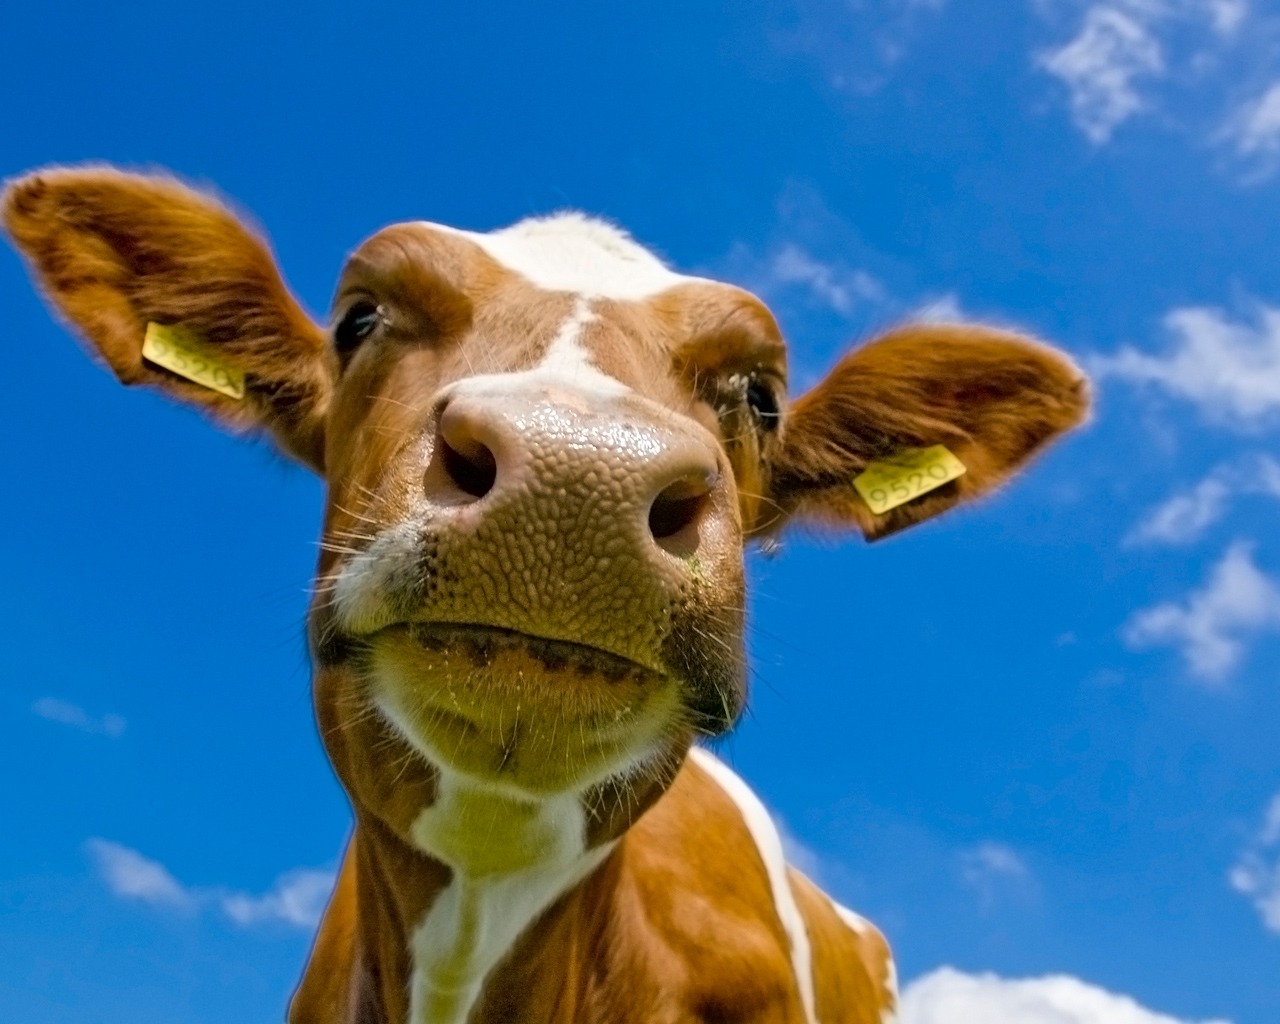 Cow Wallpaper Cows Animals Wallpapers in jpg format for free download